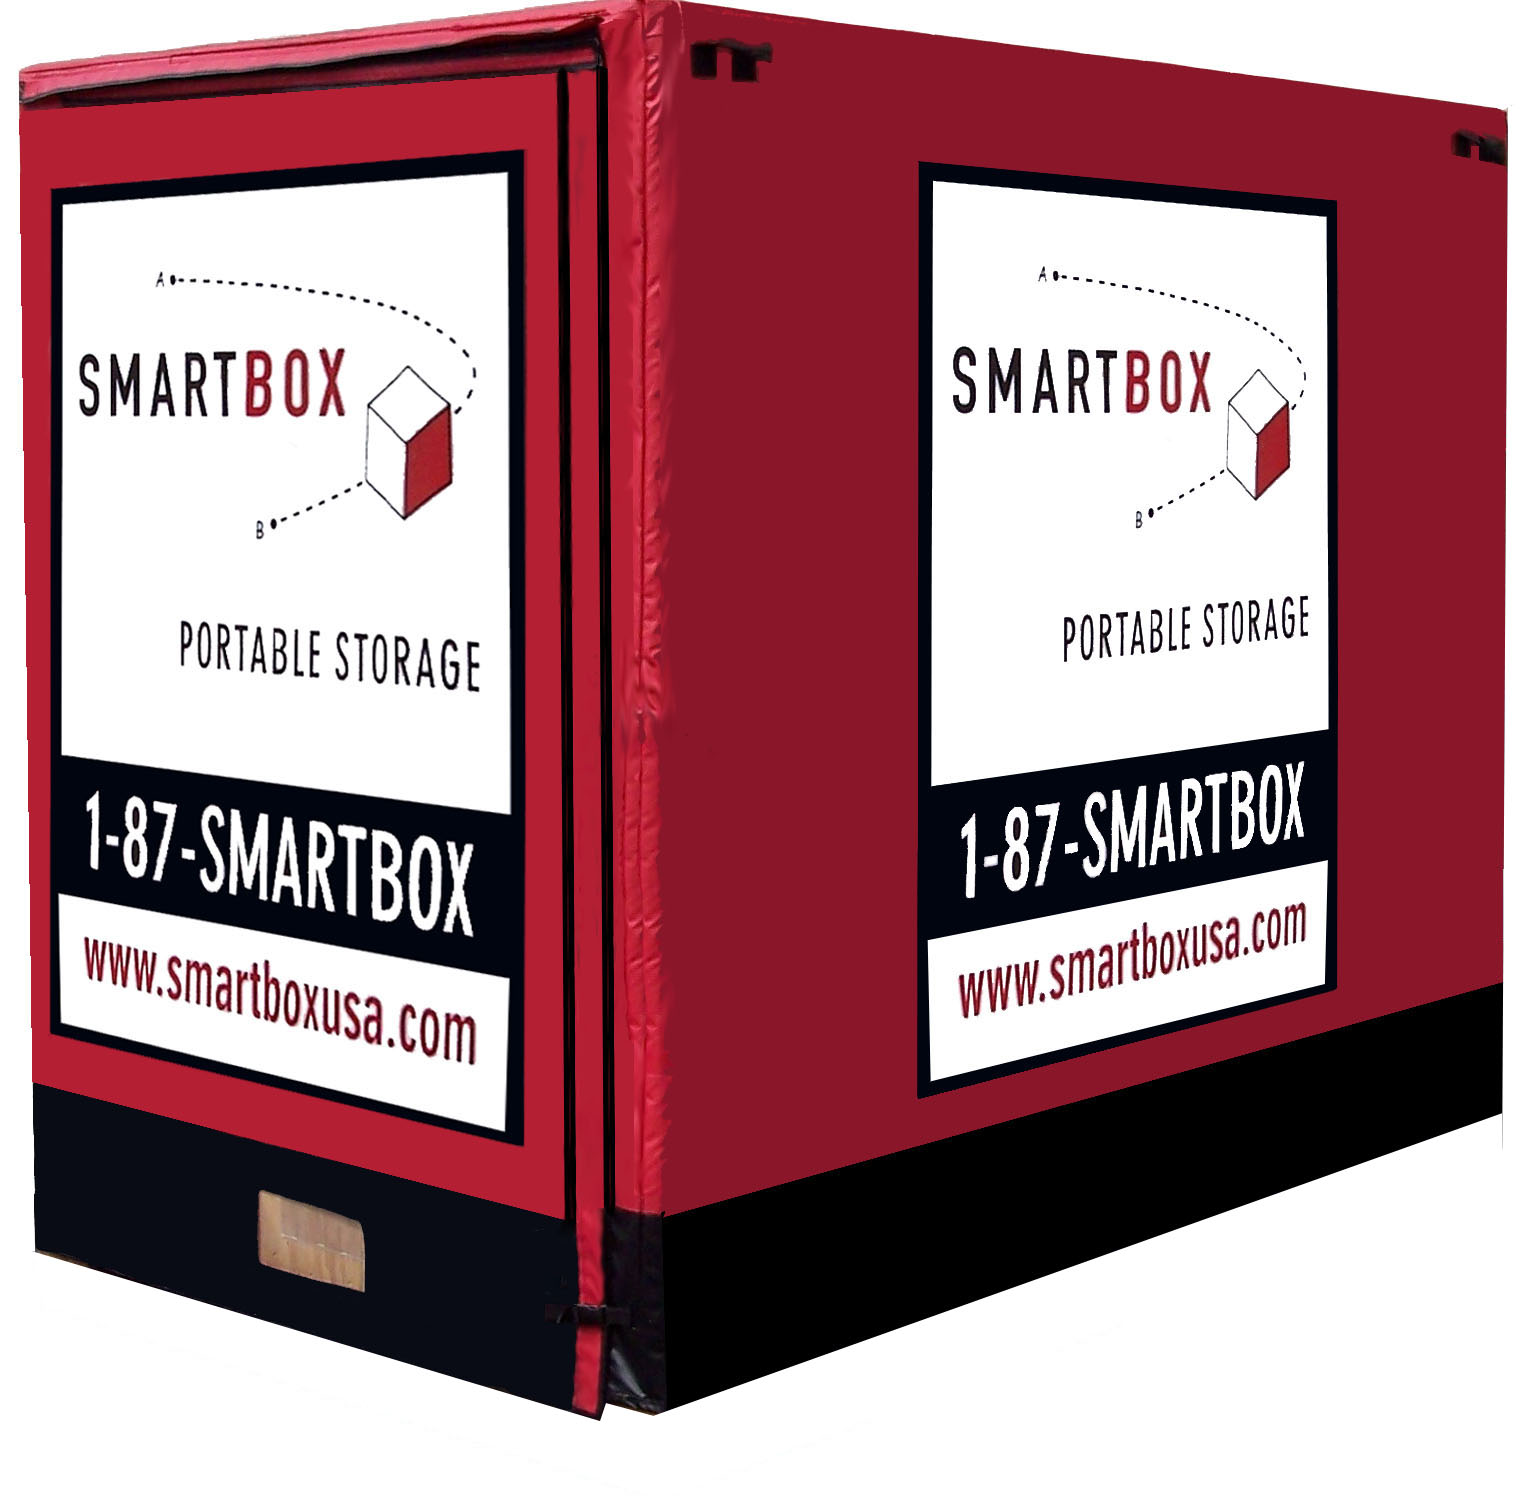 Simpler and safer portable storage solutions delivered right to your door!